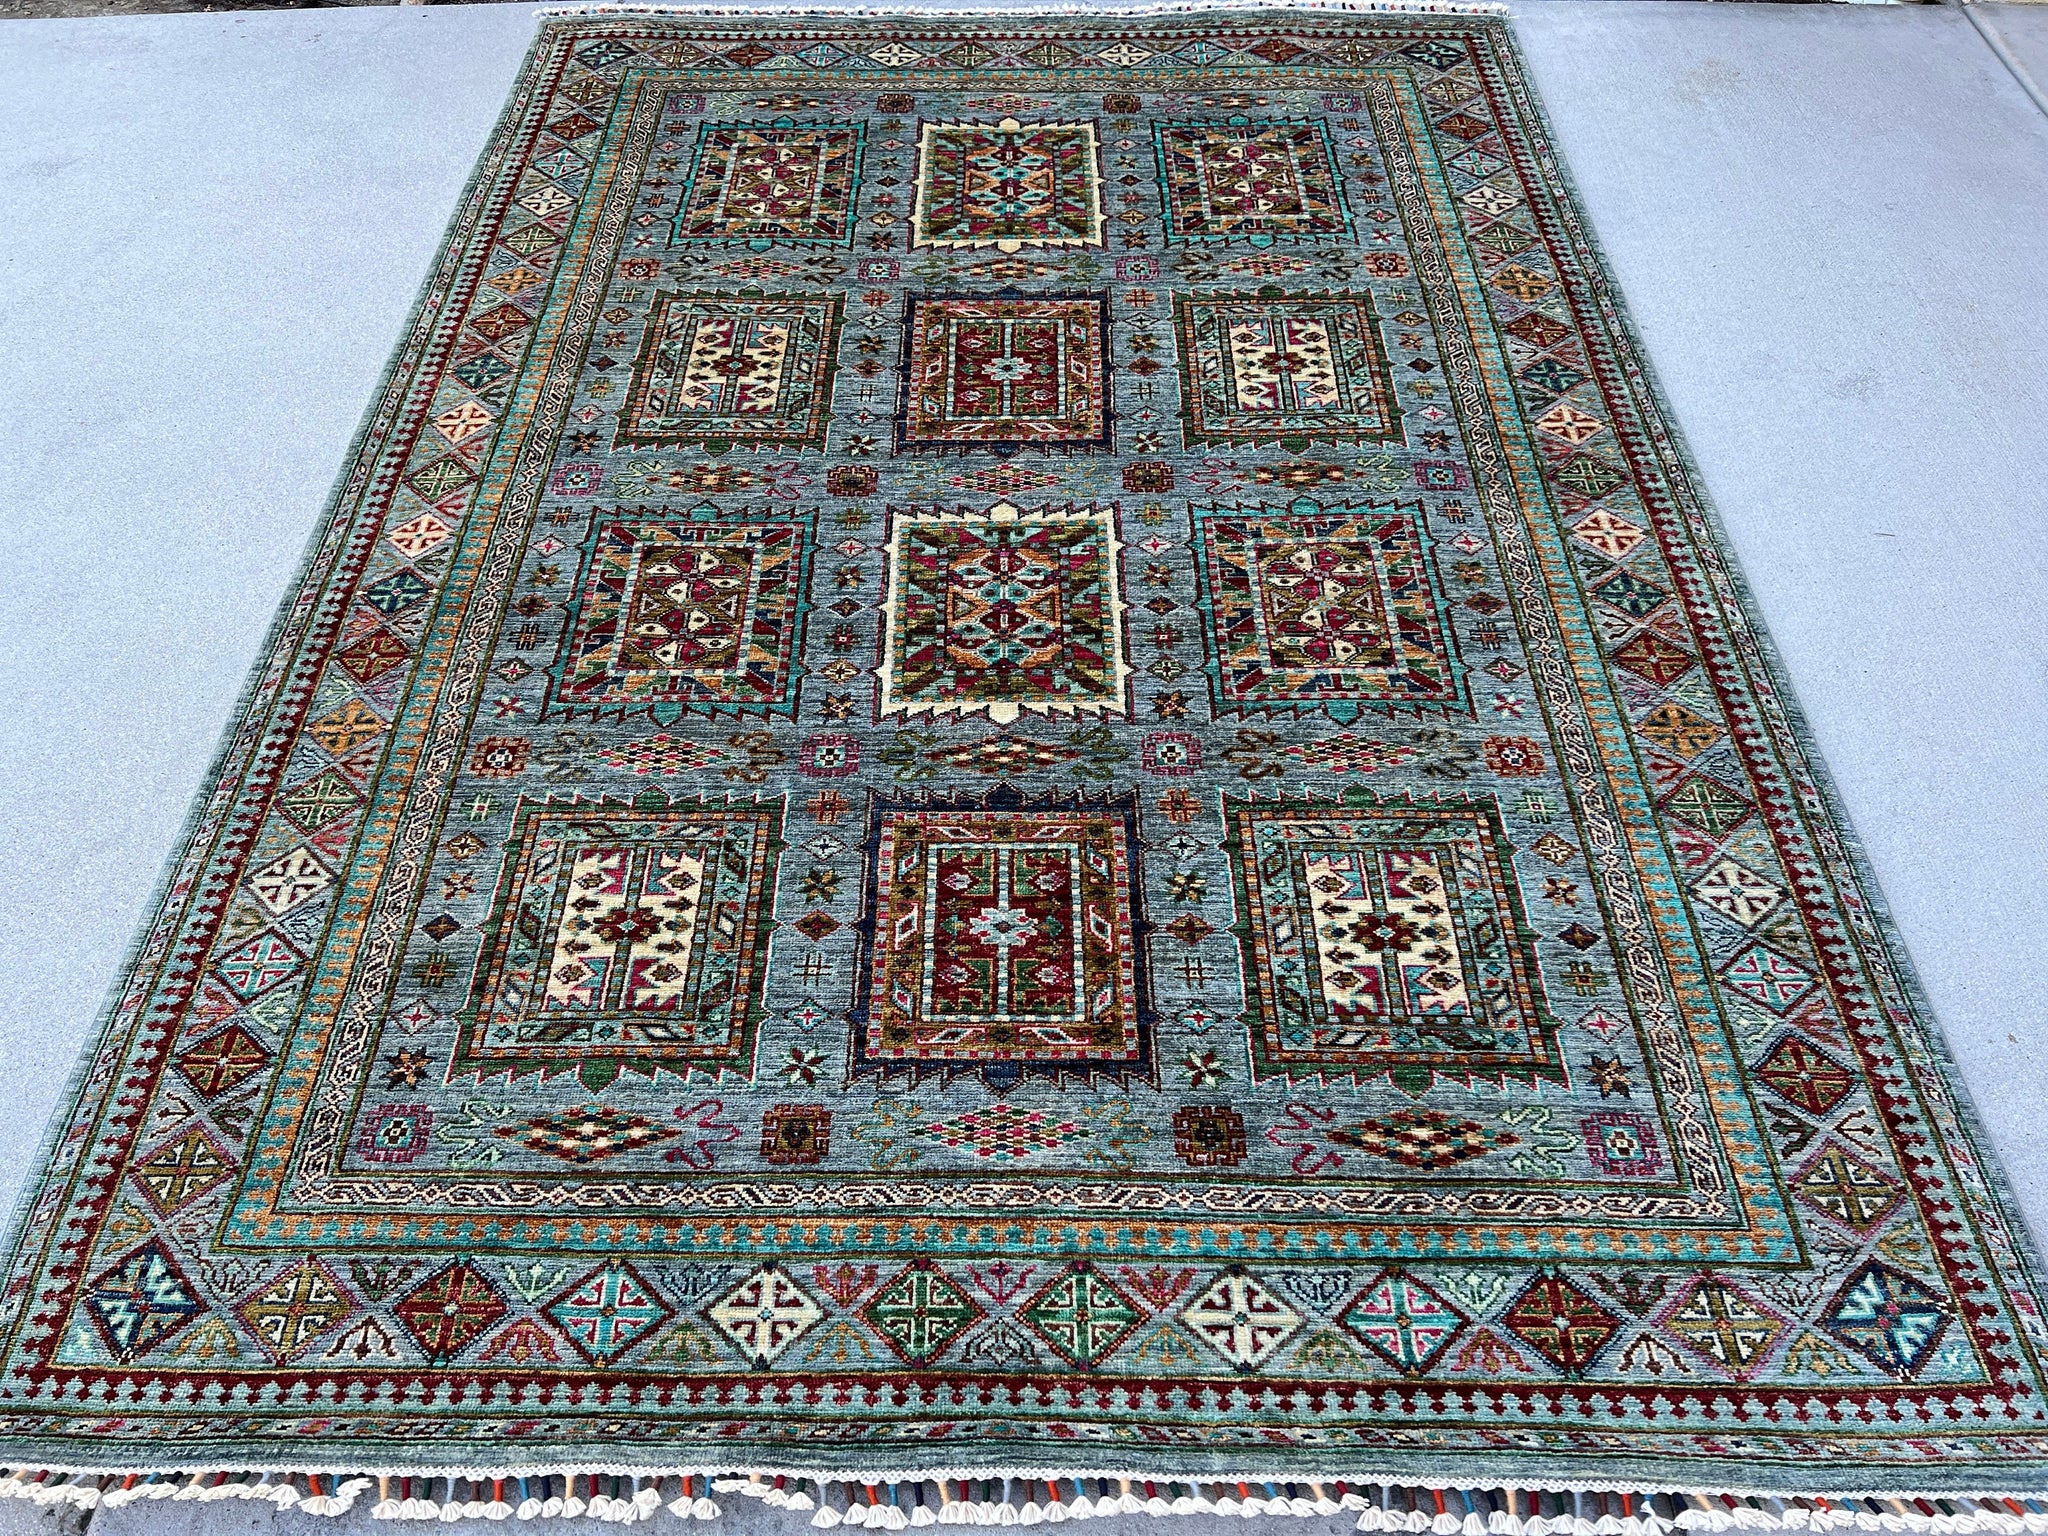 6x8 (180x245) Hand Knotted Handmade Afghan Rug | Blue Grey Brick Red Moss Lime Green Pink Caramel Cream Ivory Turquoise | Turkish Wool Boho